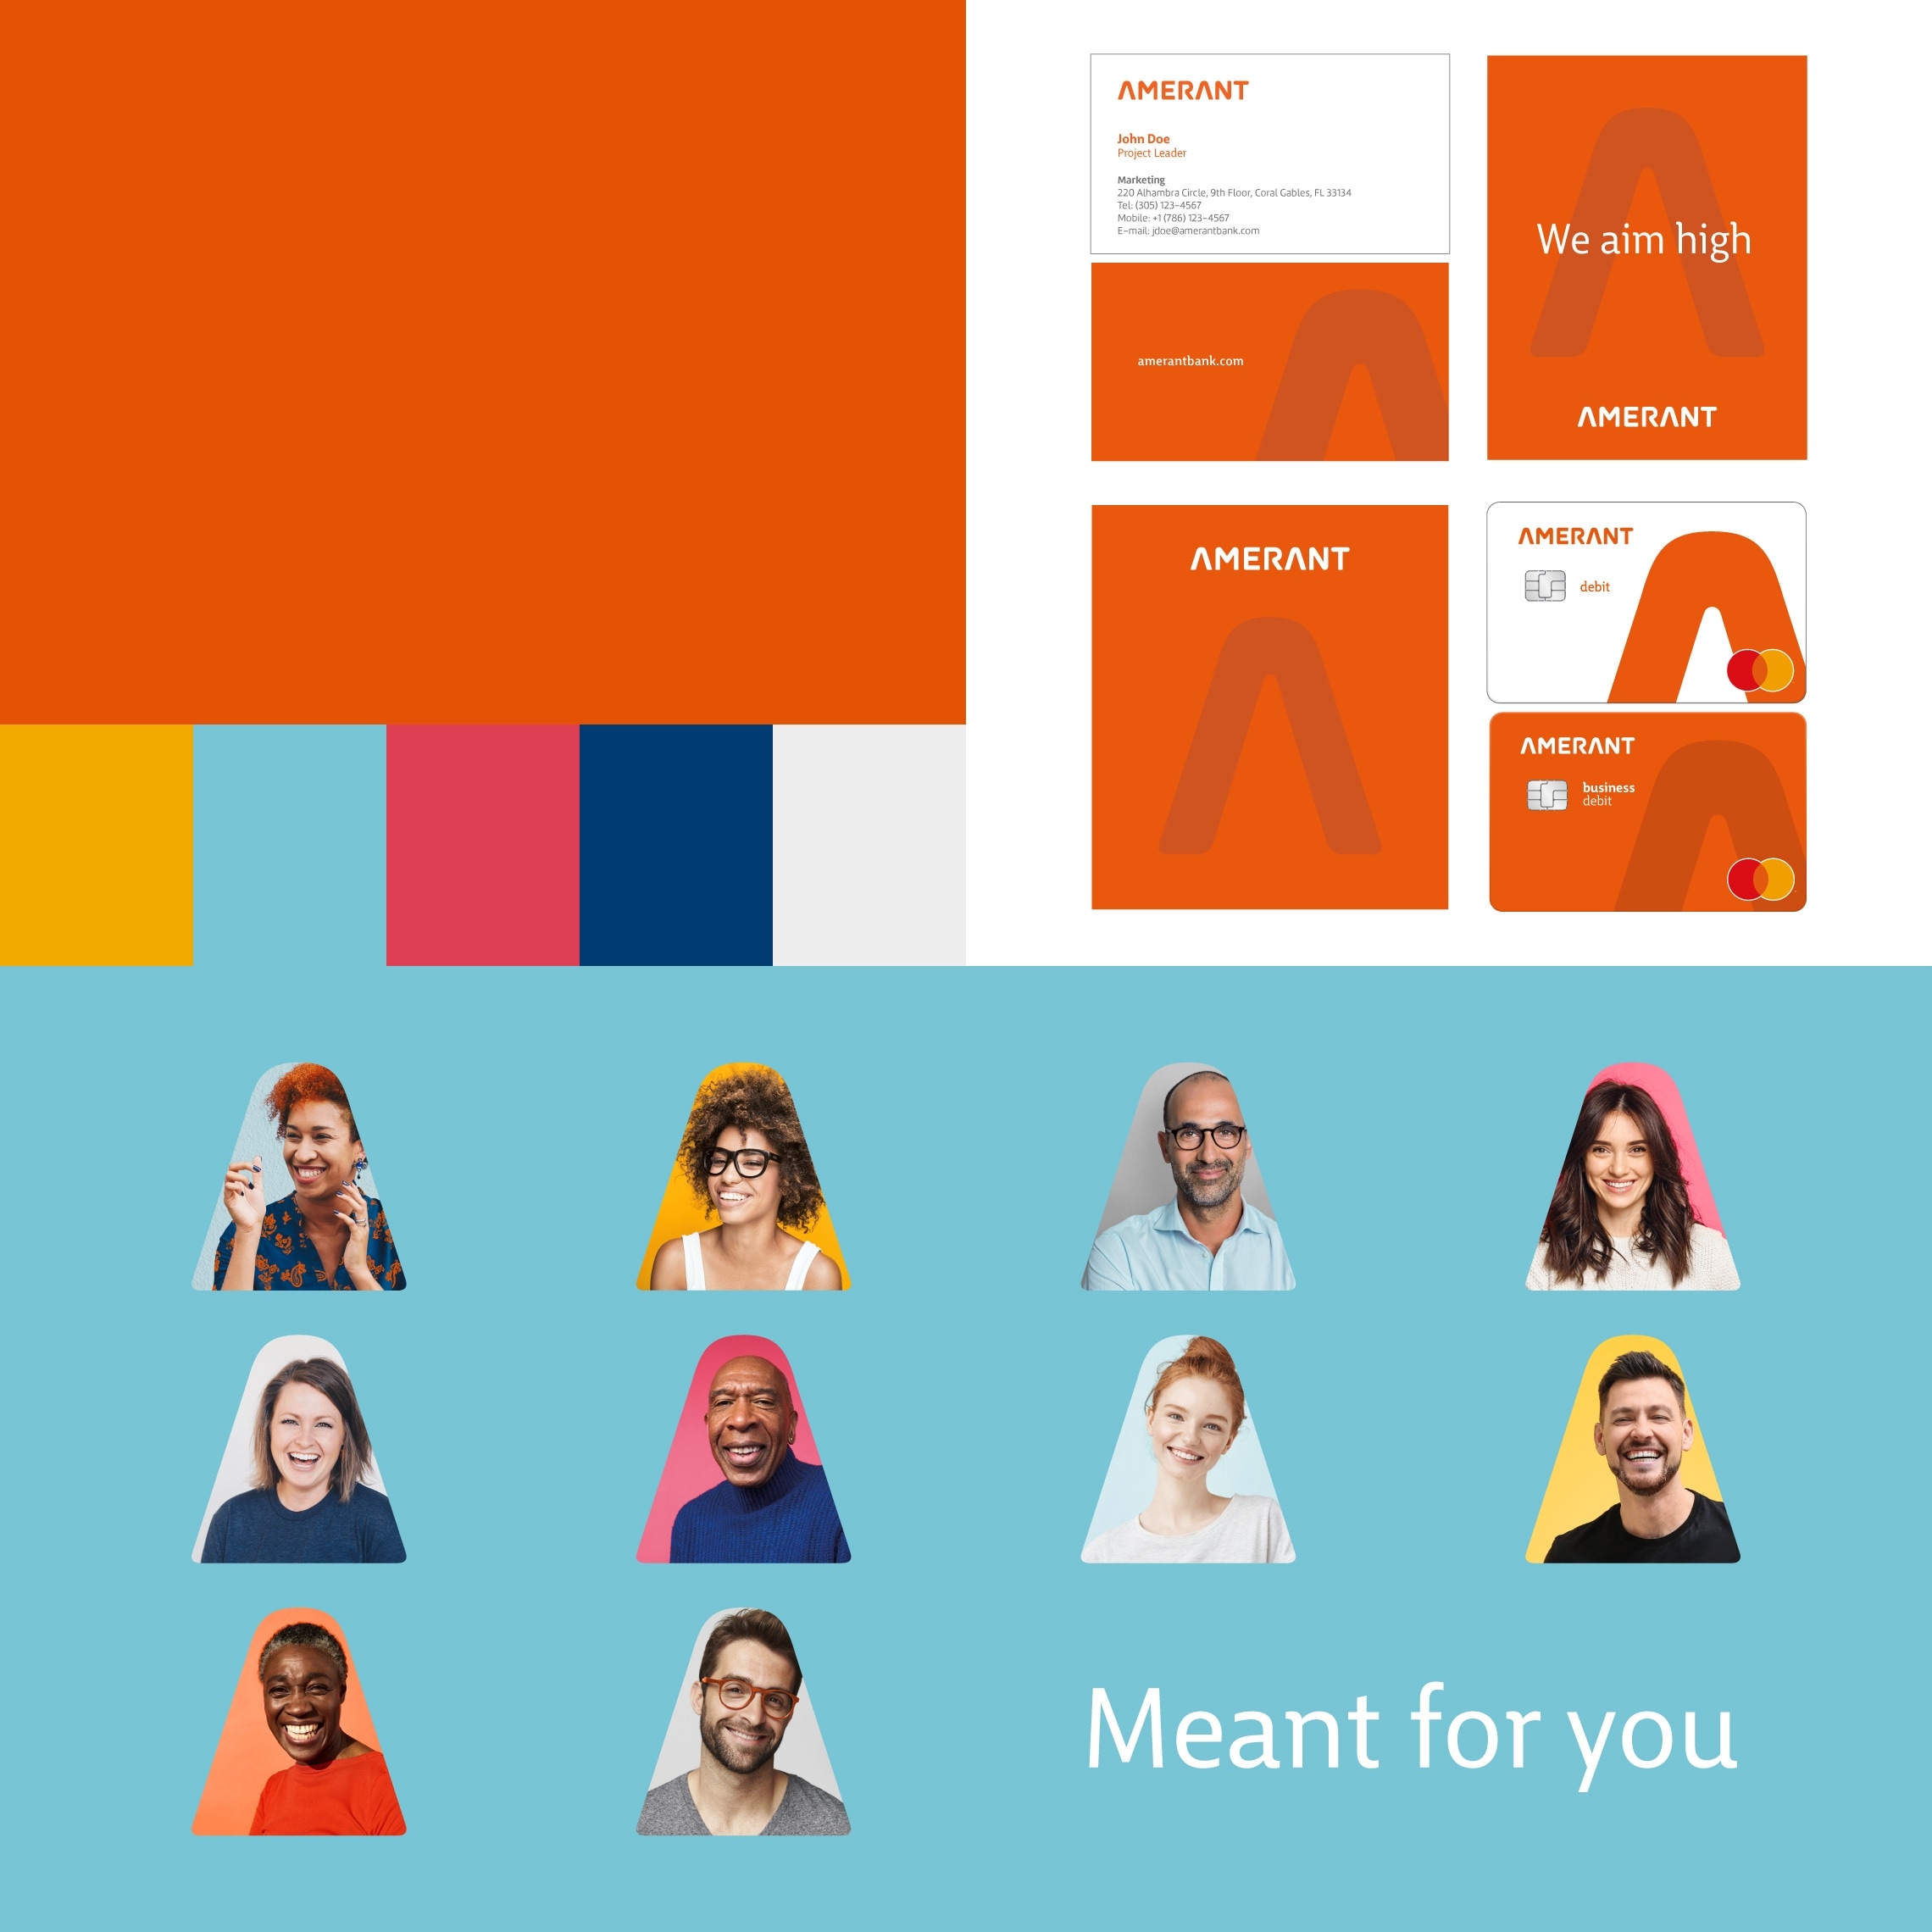 different elements of the brand identity developed for Amerant Bank: color palette, business cards, debit and credit cards, and imagery